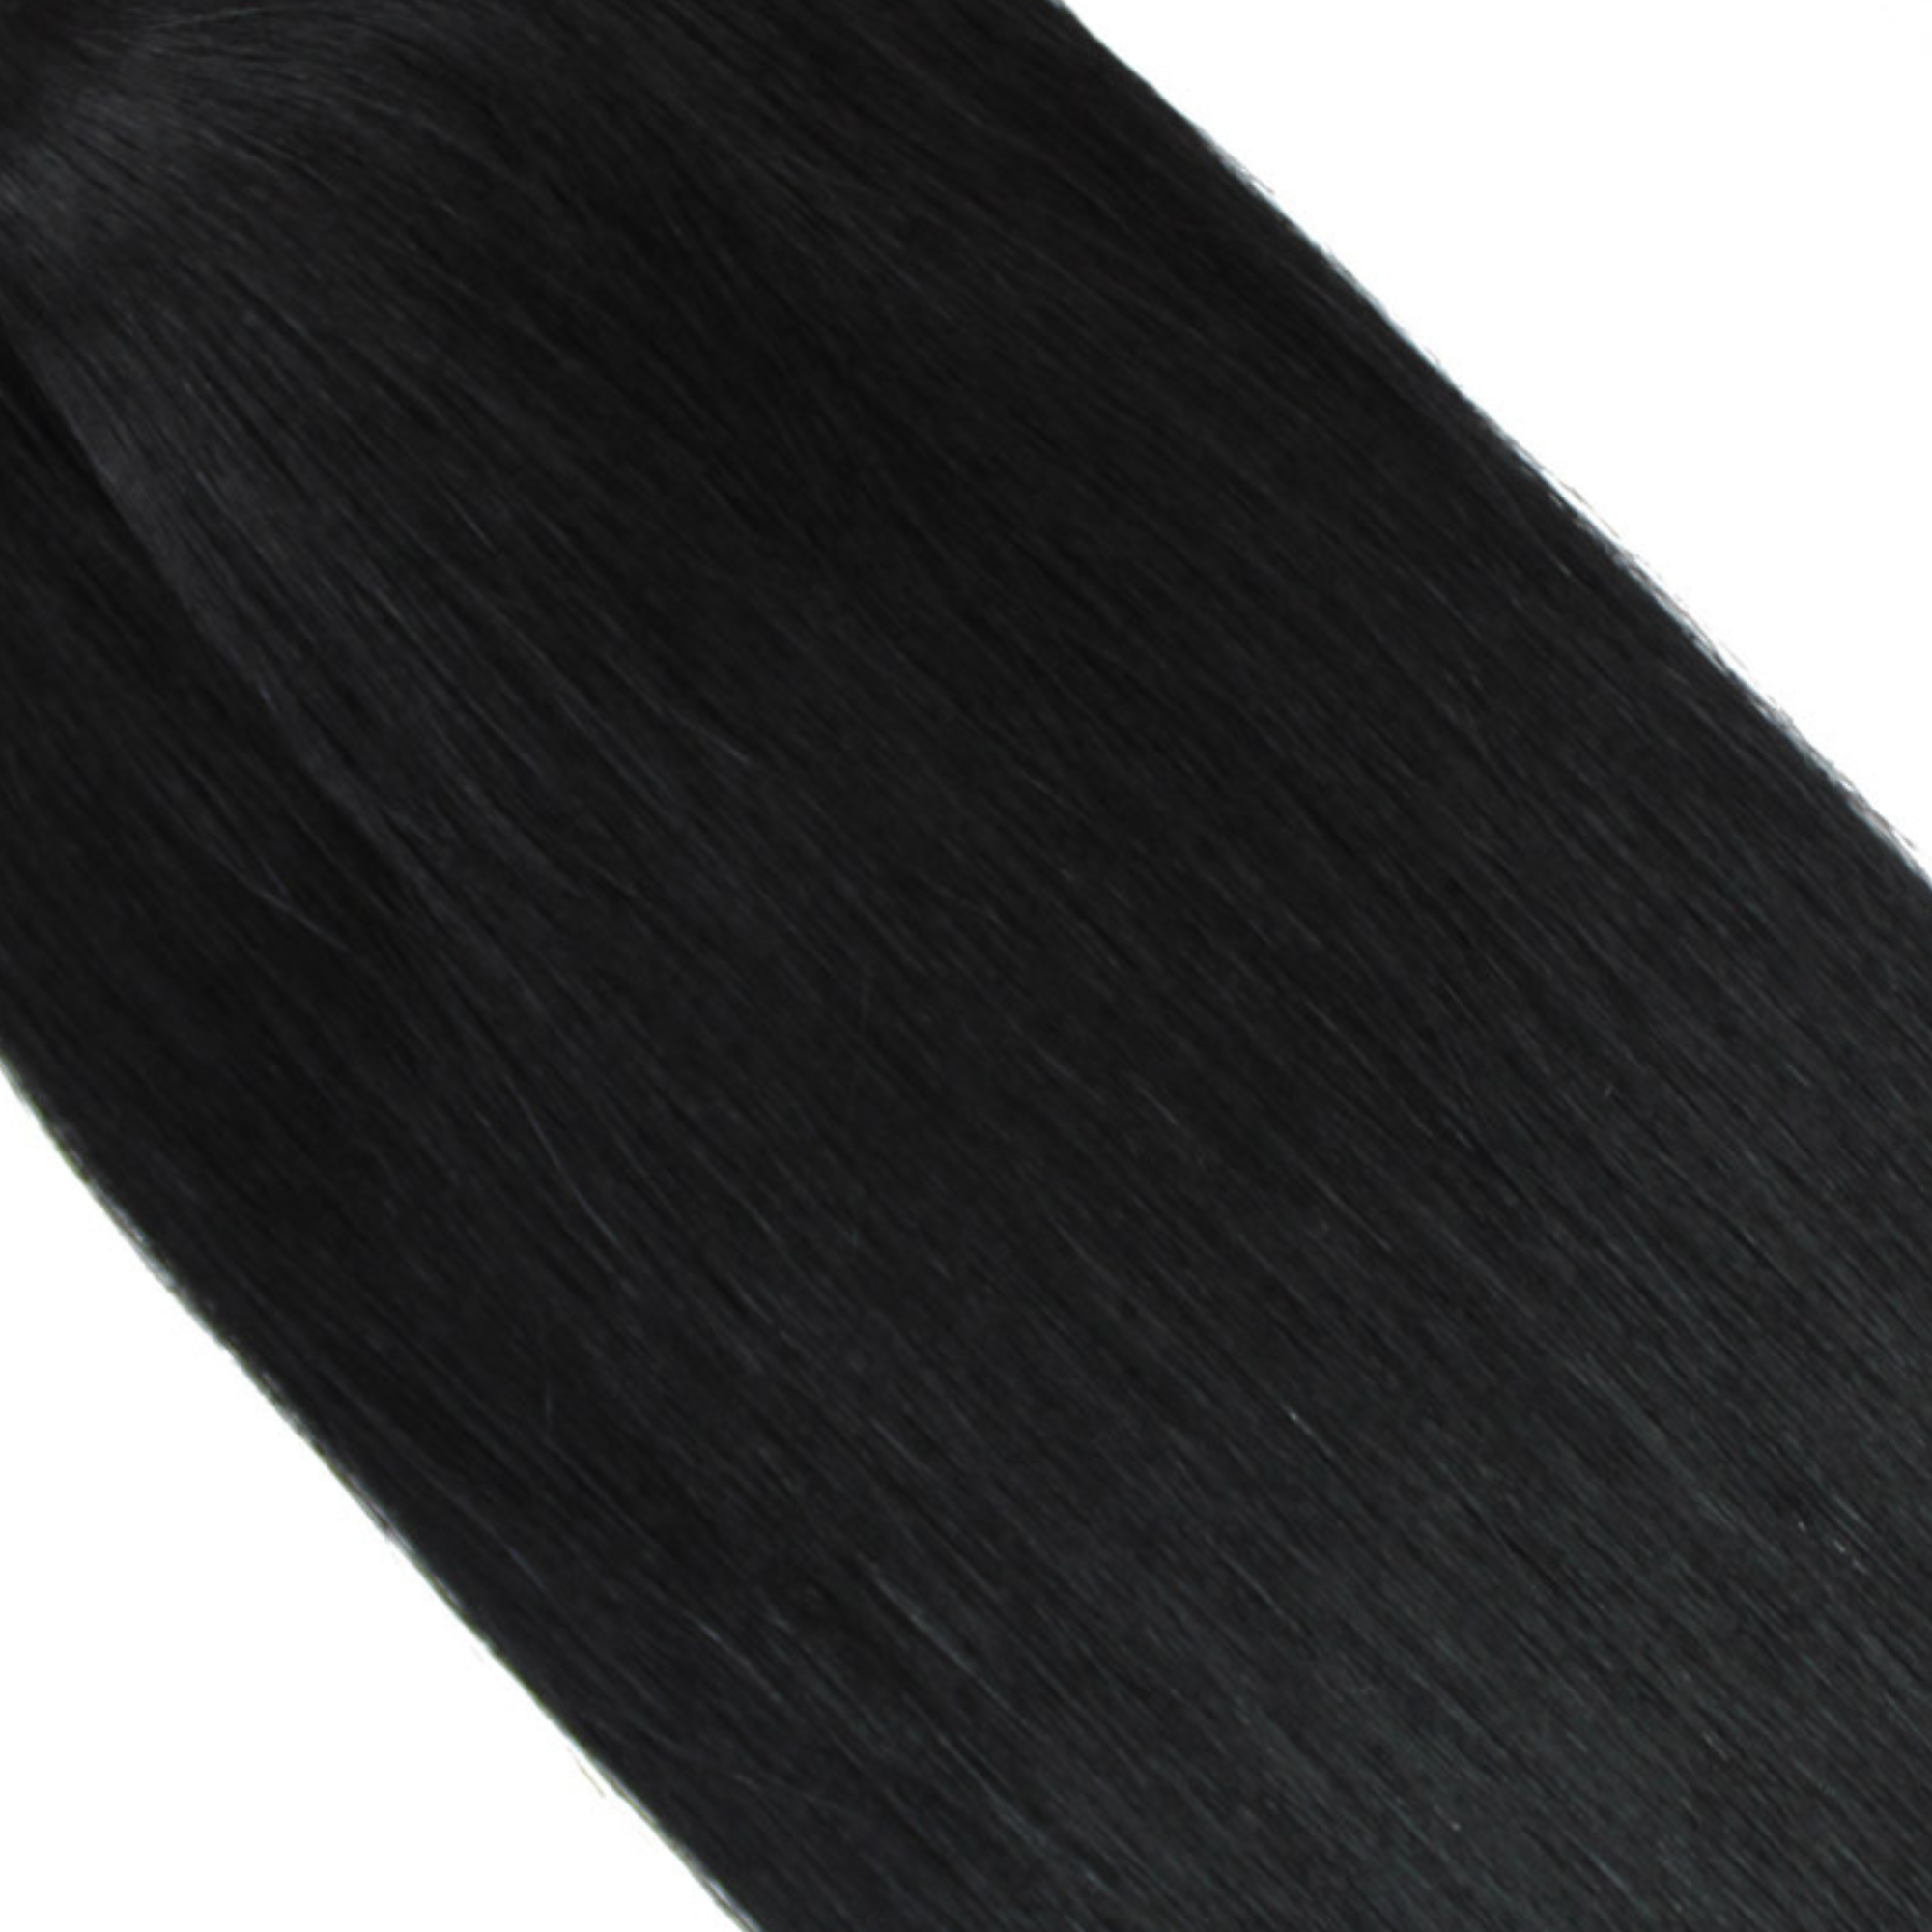 "hair rehab london 24" length 280 grams weight ultimate clip-in hair extensions shade titled jet black"